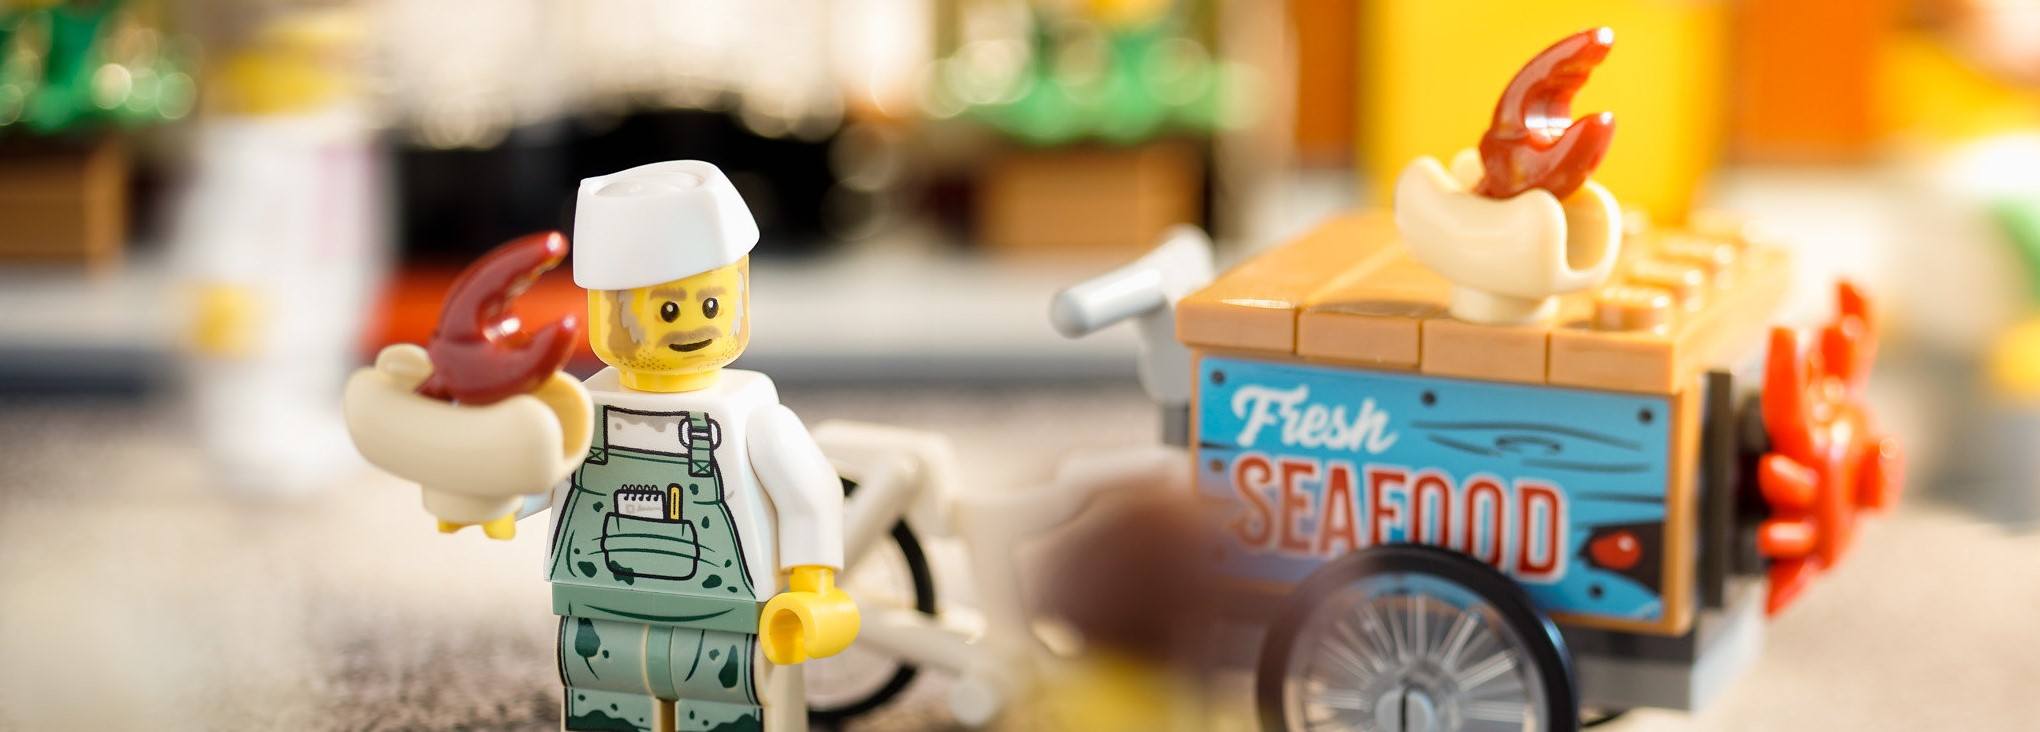 A LEGO holding some seafood, which looks like a big portion size.